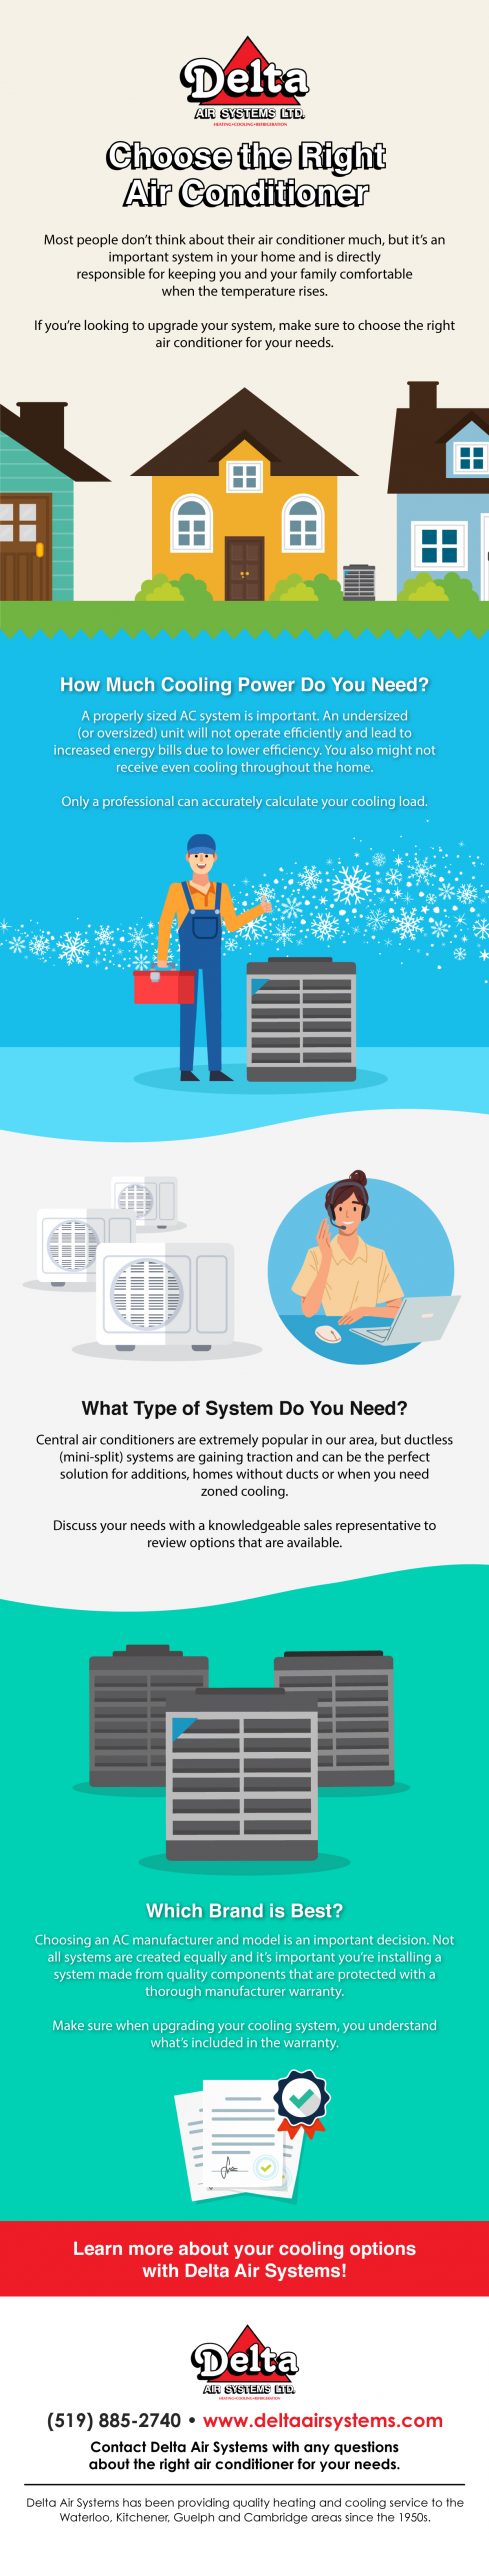 choose the right AC